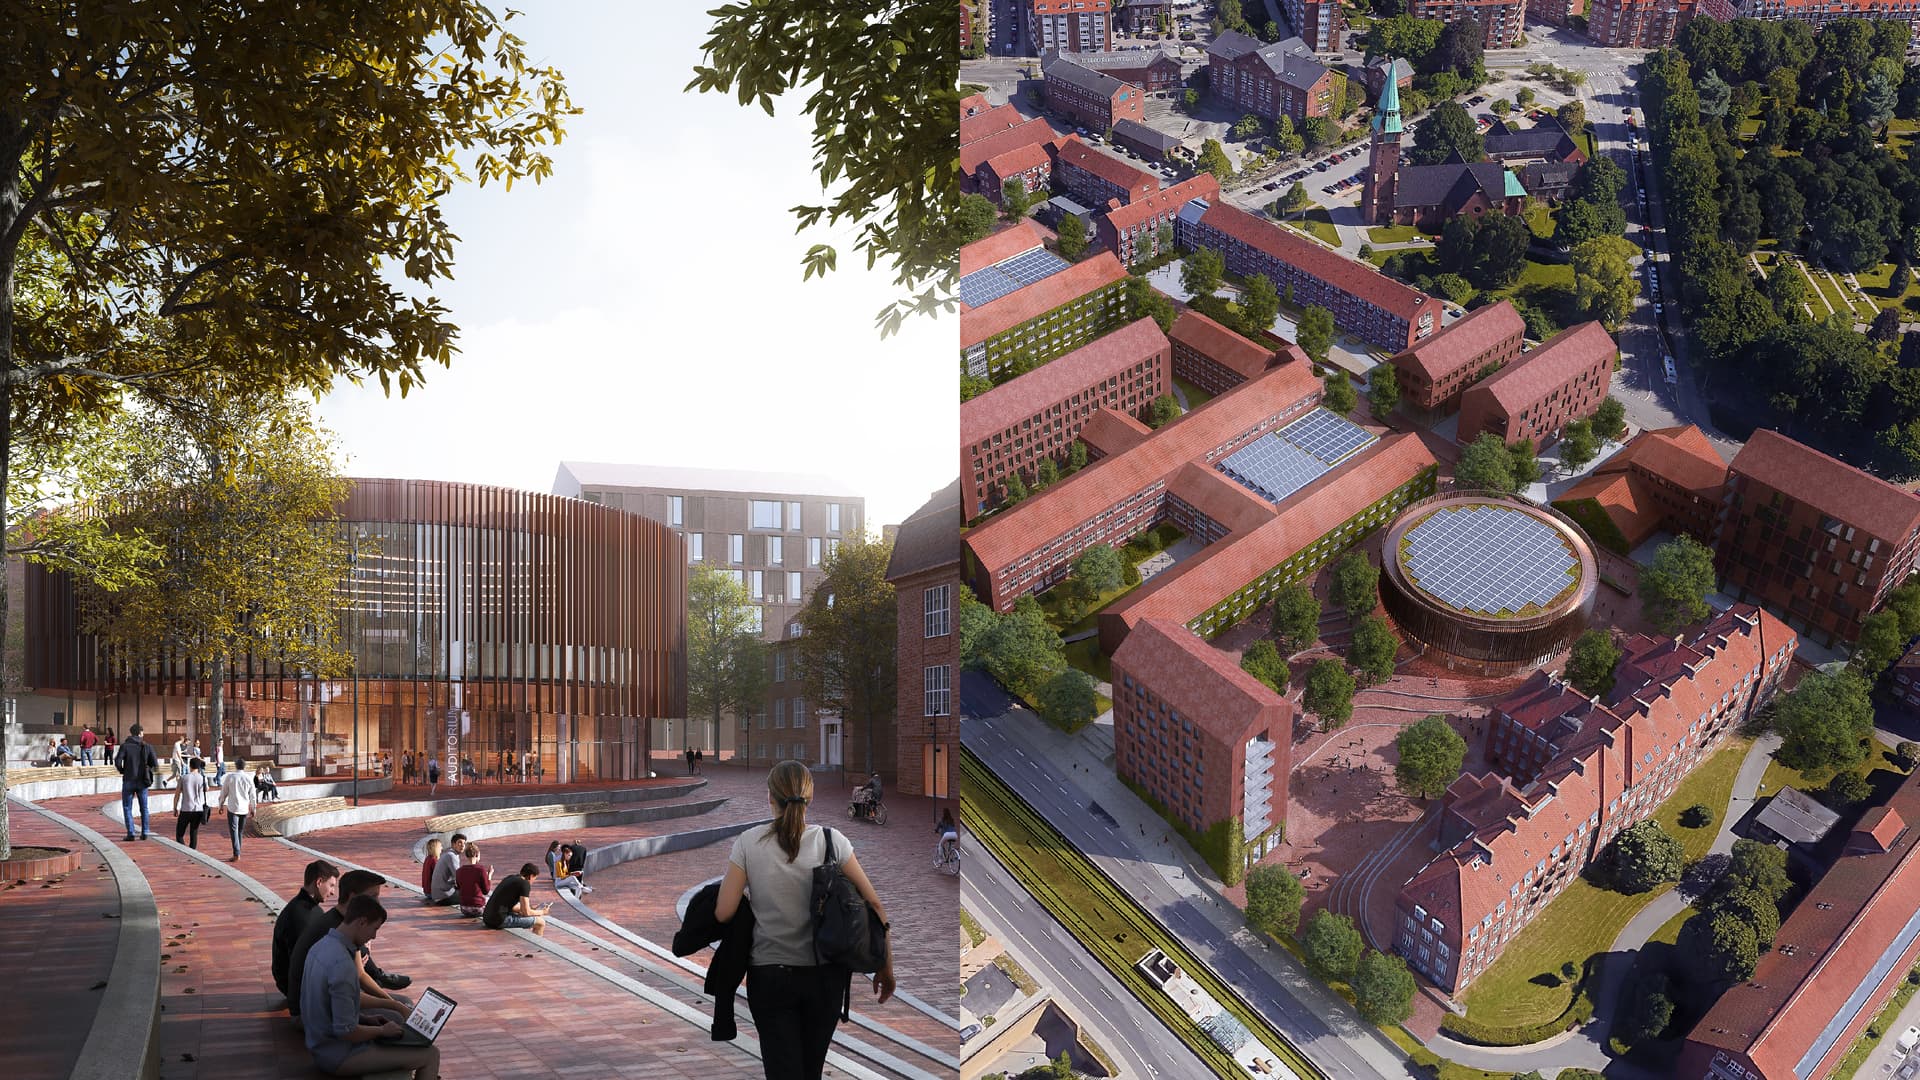 Both active and passive energy solutions are included in the design of the future Aarhus BSS, which hopes to achieve a DGNB Gold certification